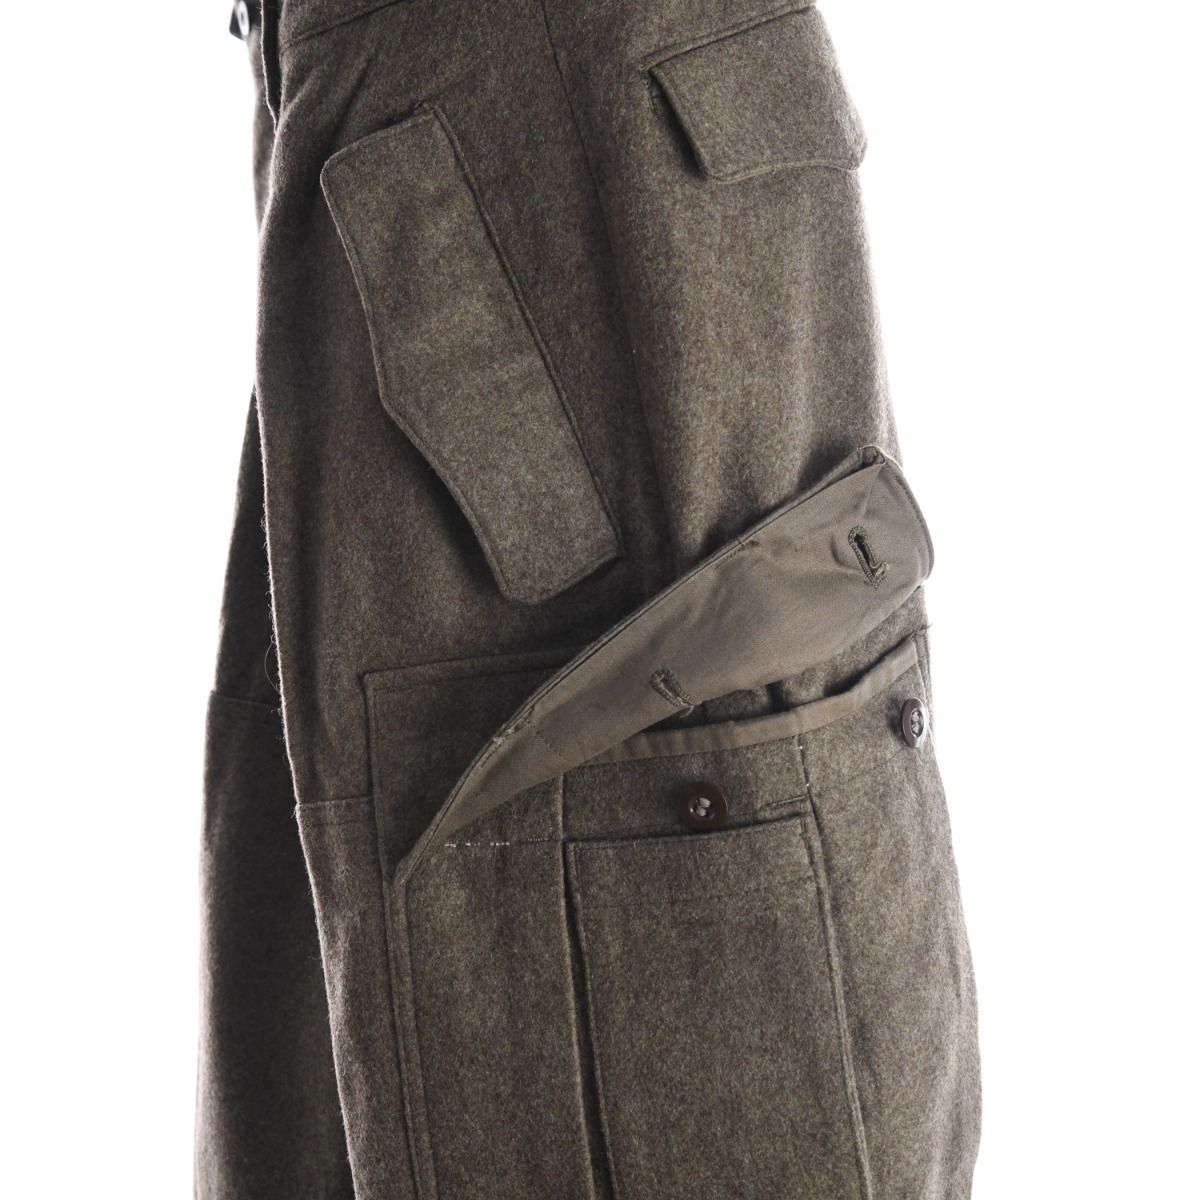 1960s West German BAWI Wool Military Trousers